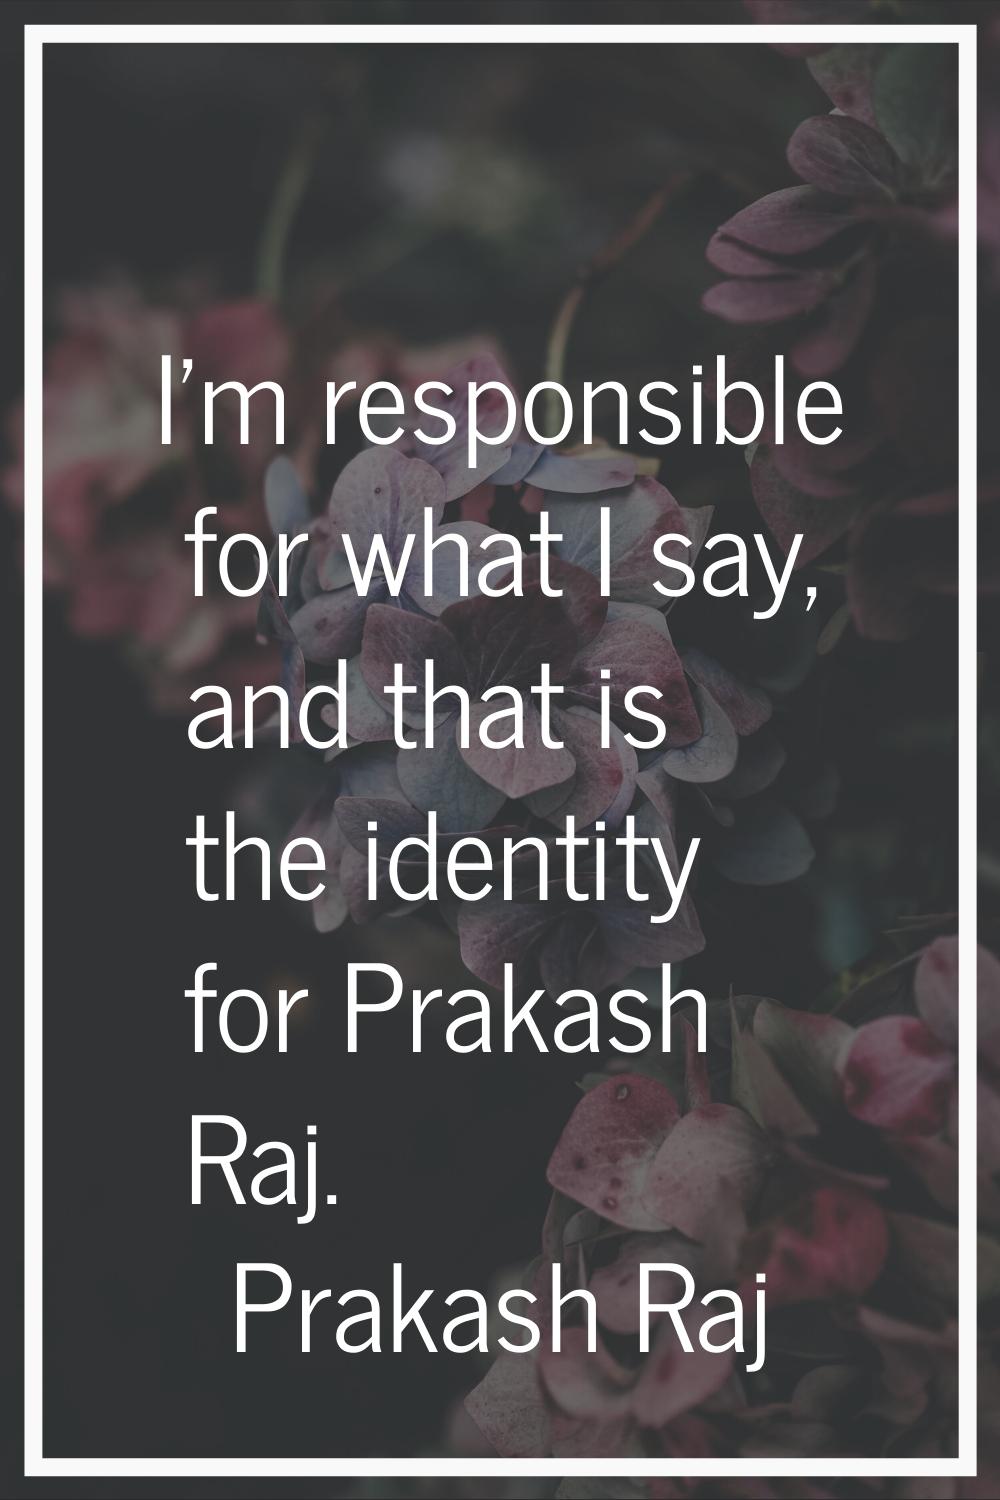 I'm responsible for what I say, and that is the identity for Prakash Raj.